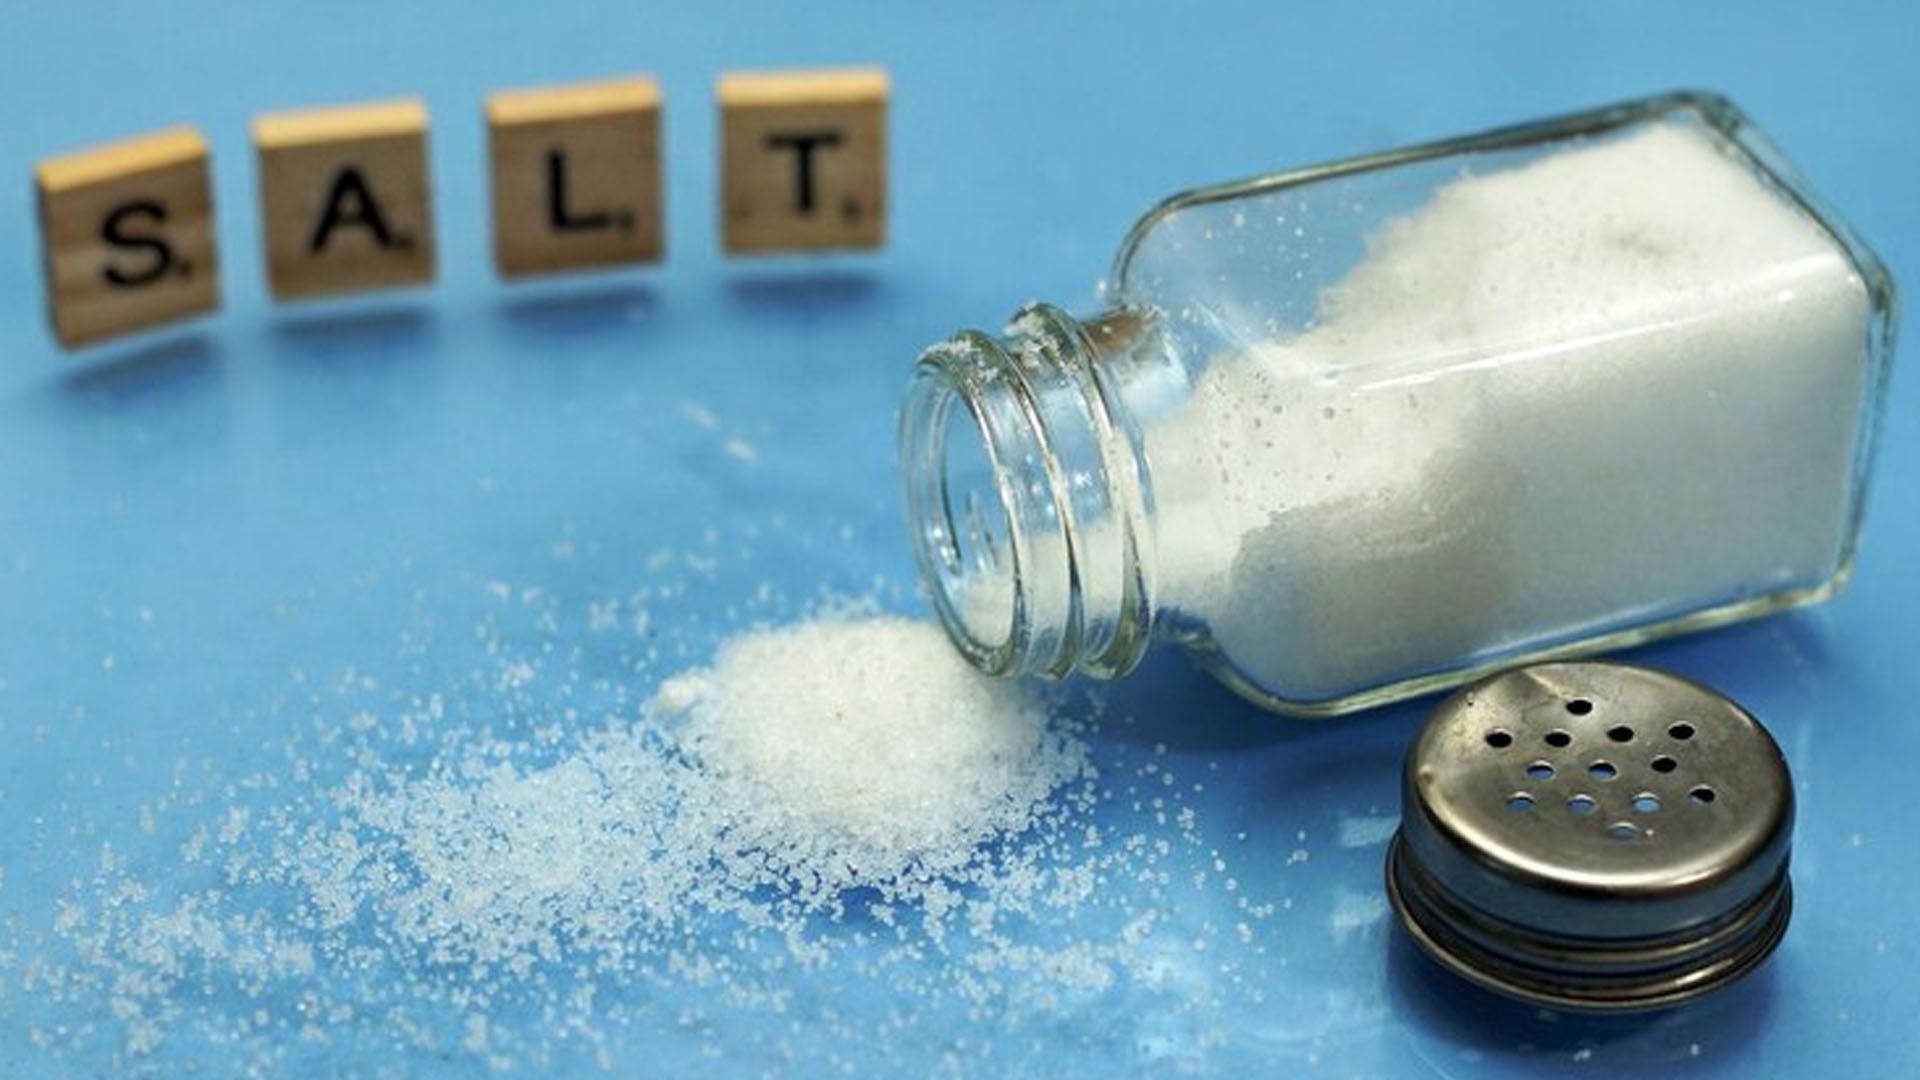 What are the Home Remedies for Low Sodium Levels?